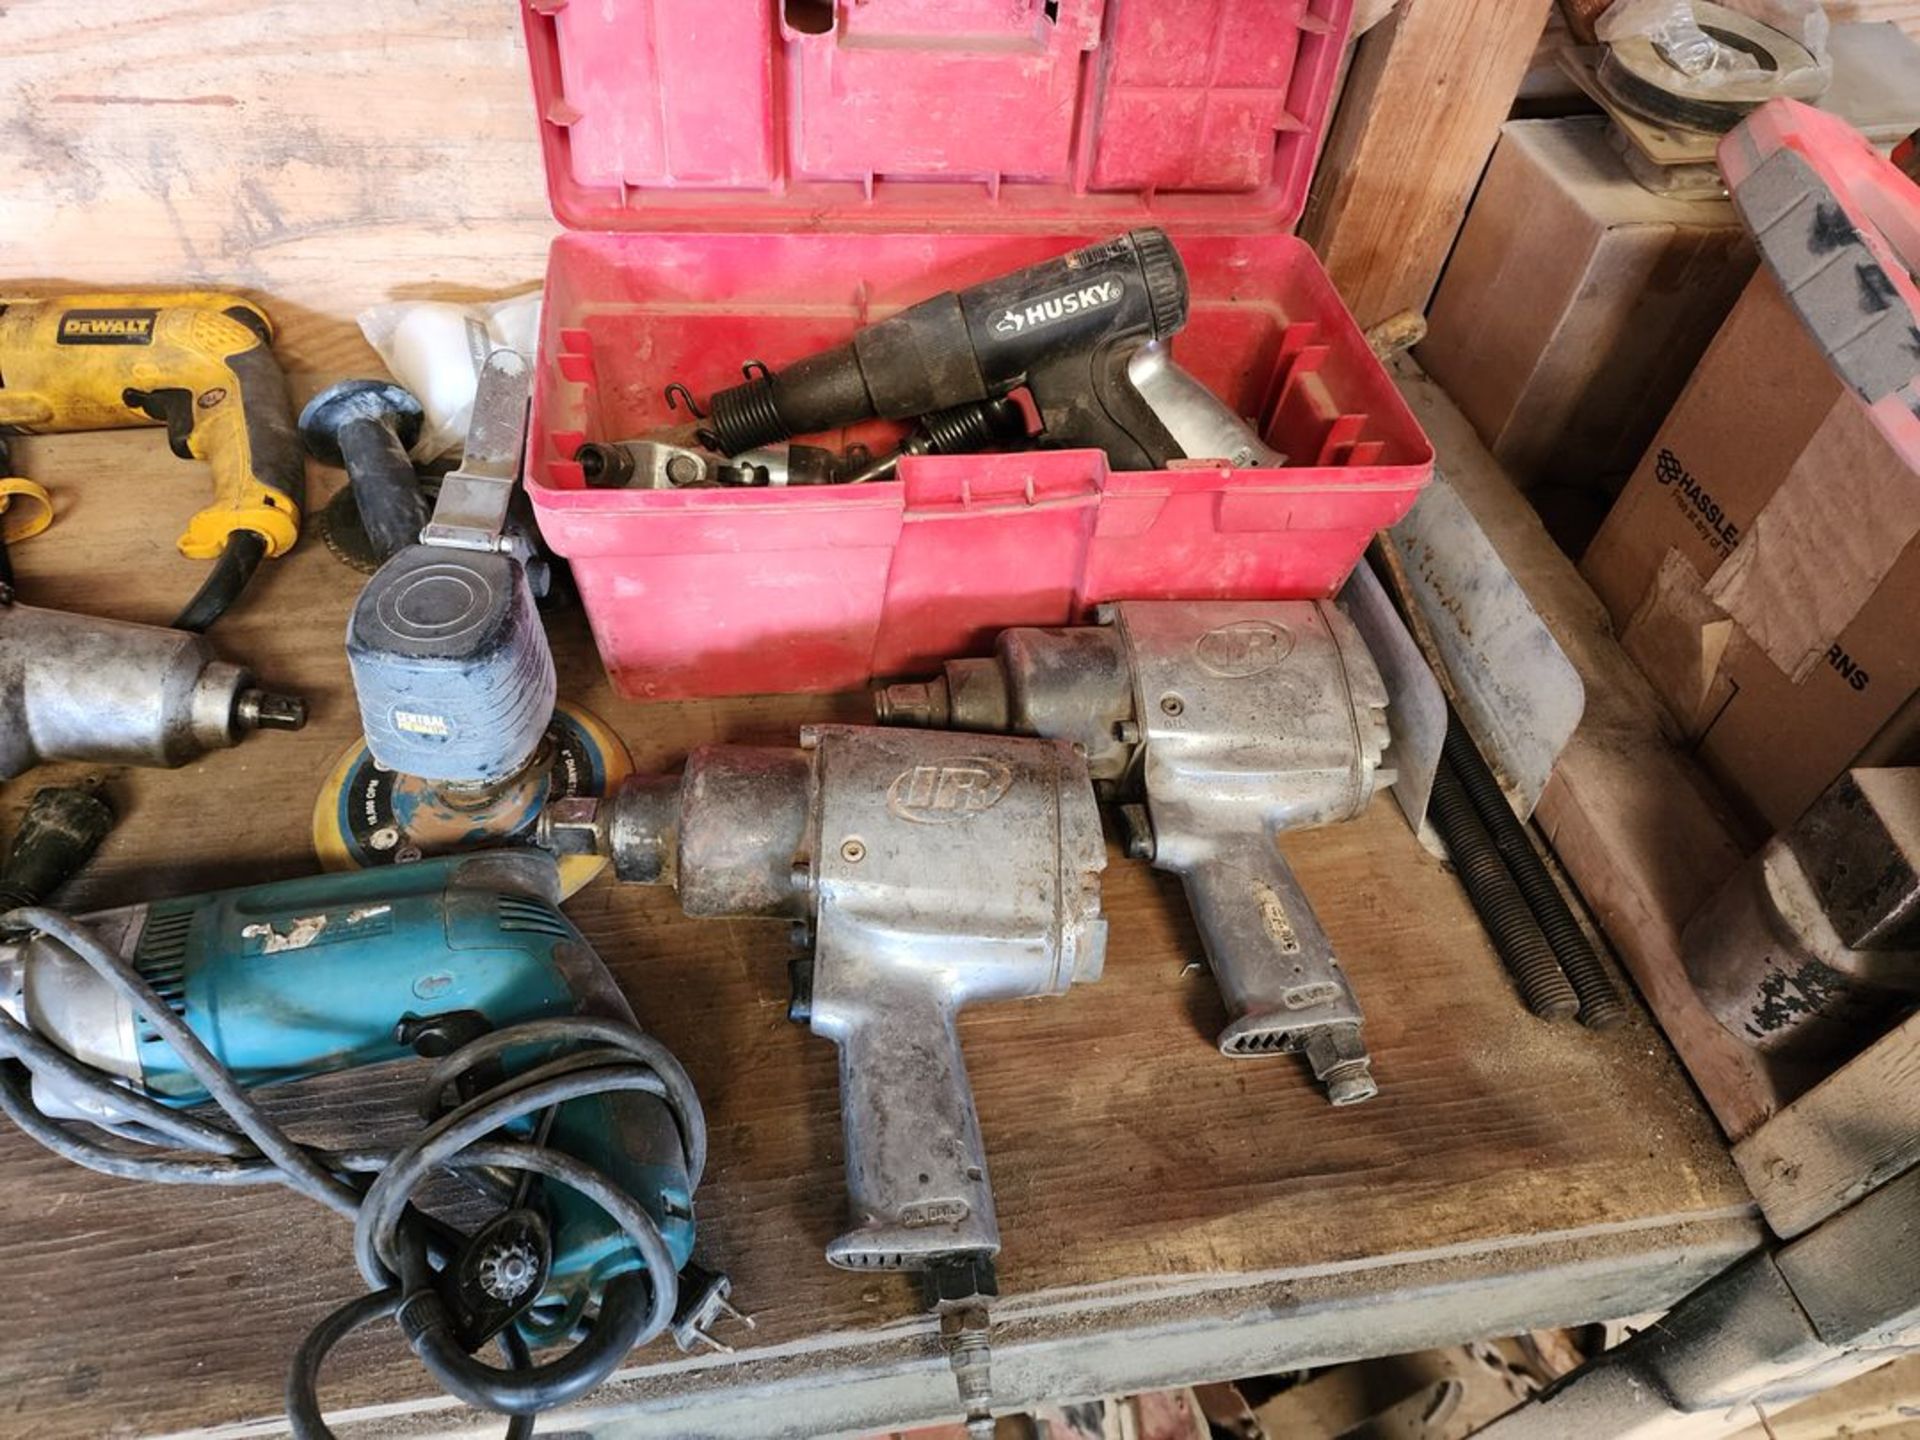 Contents Of Rack To Include But Not Limited To: (Welder Excluded) Assorted Power Tools; Drills; - Image 12 of 49